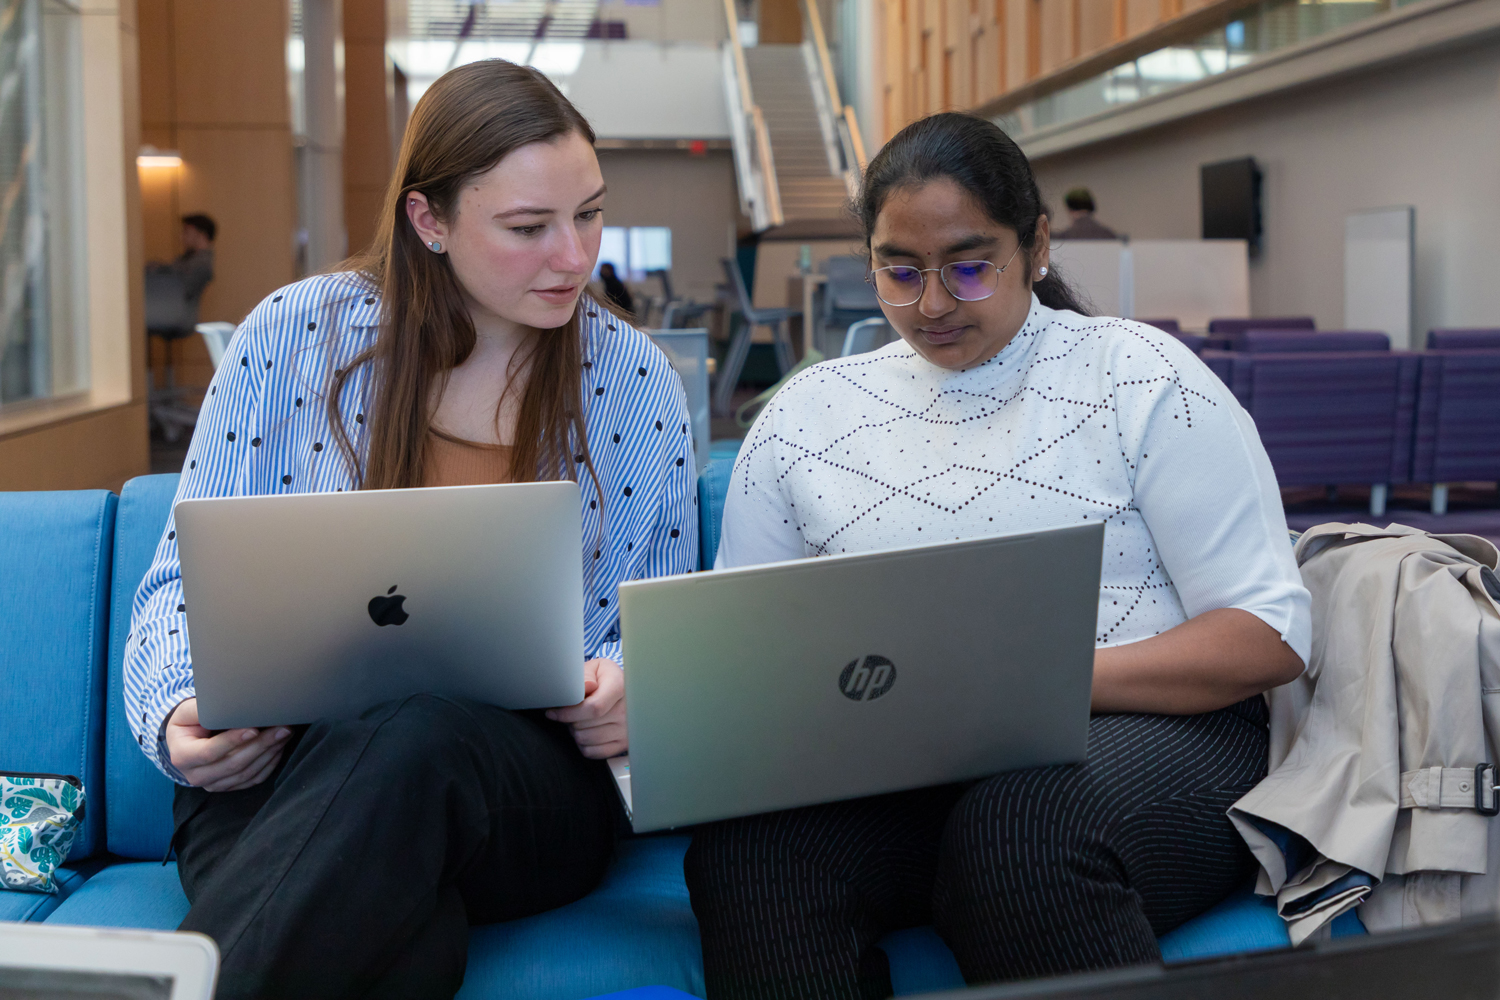 Two students sitting on a couch with laptops.